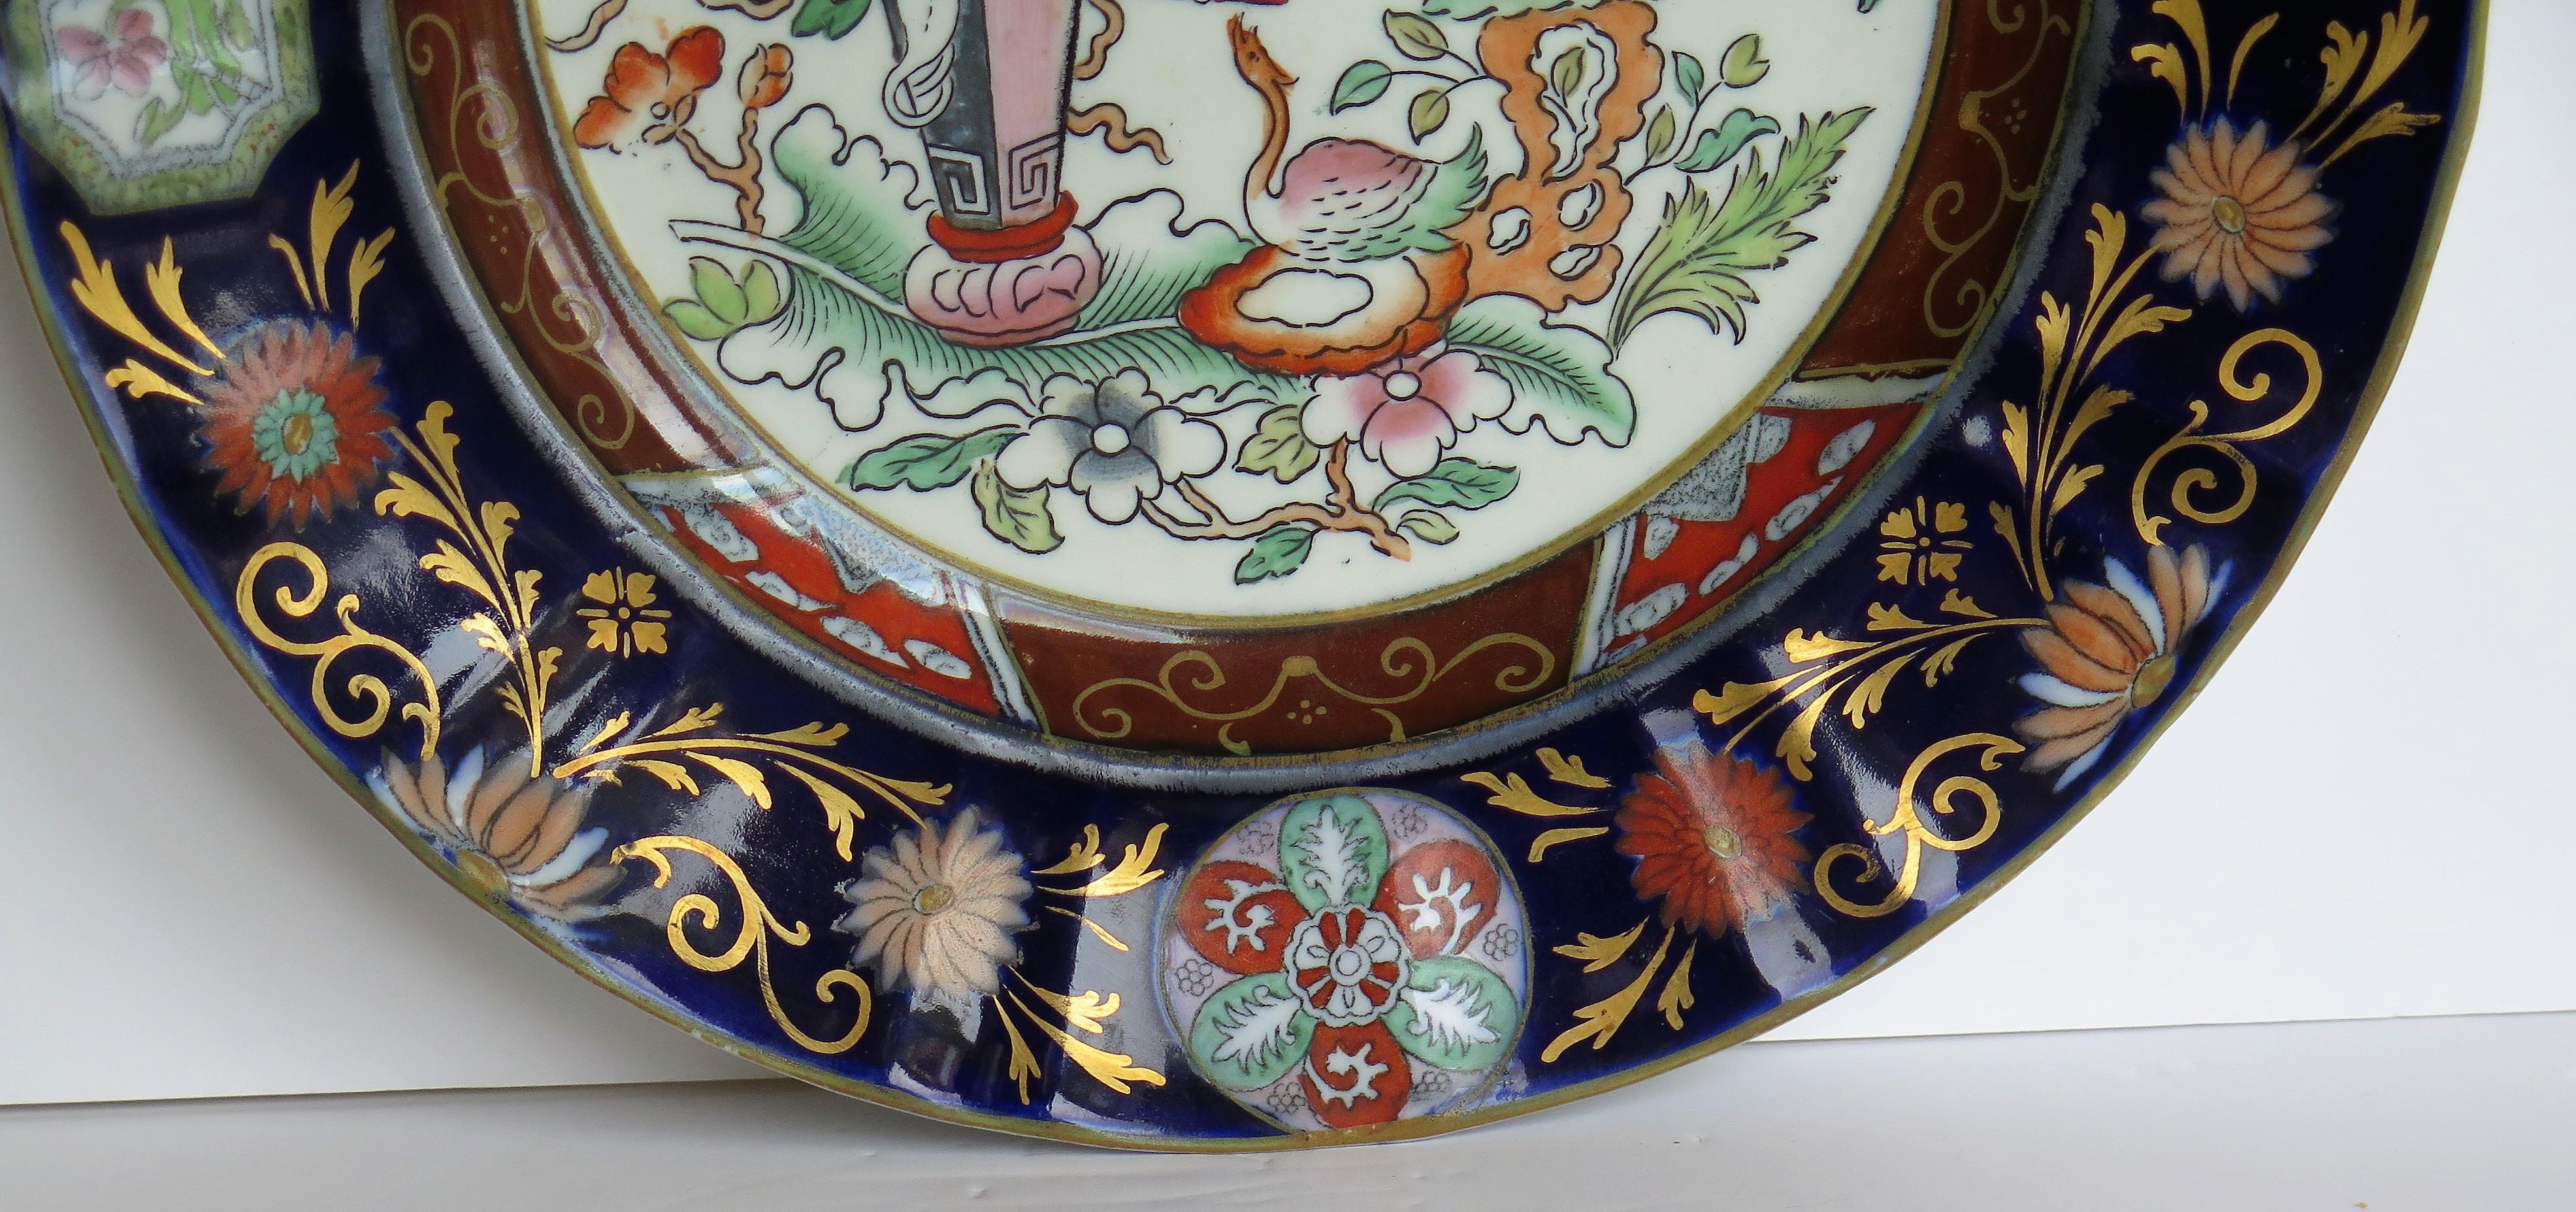 Masons' Ashworths Large Dinner Plate in Table and Flower Pot Pattern, circa 1875 For Sale 6